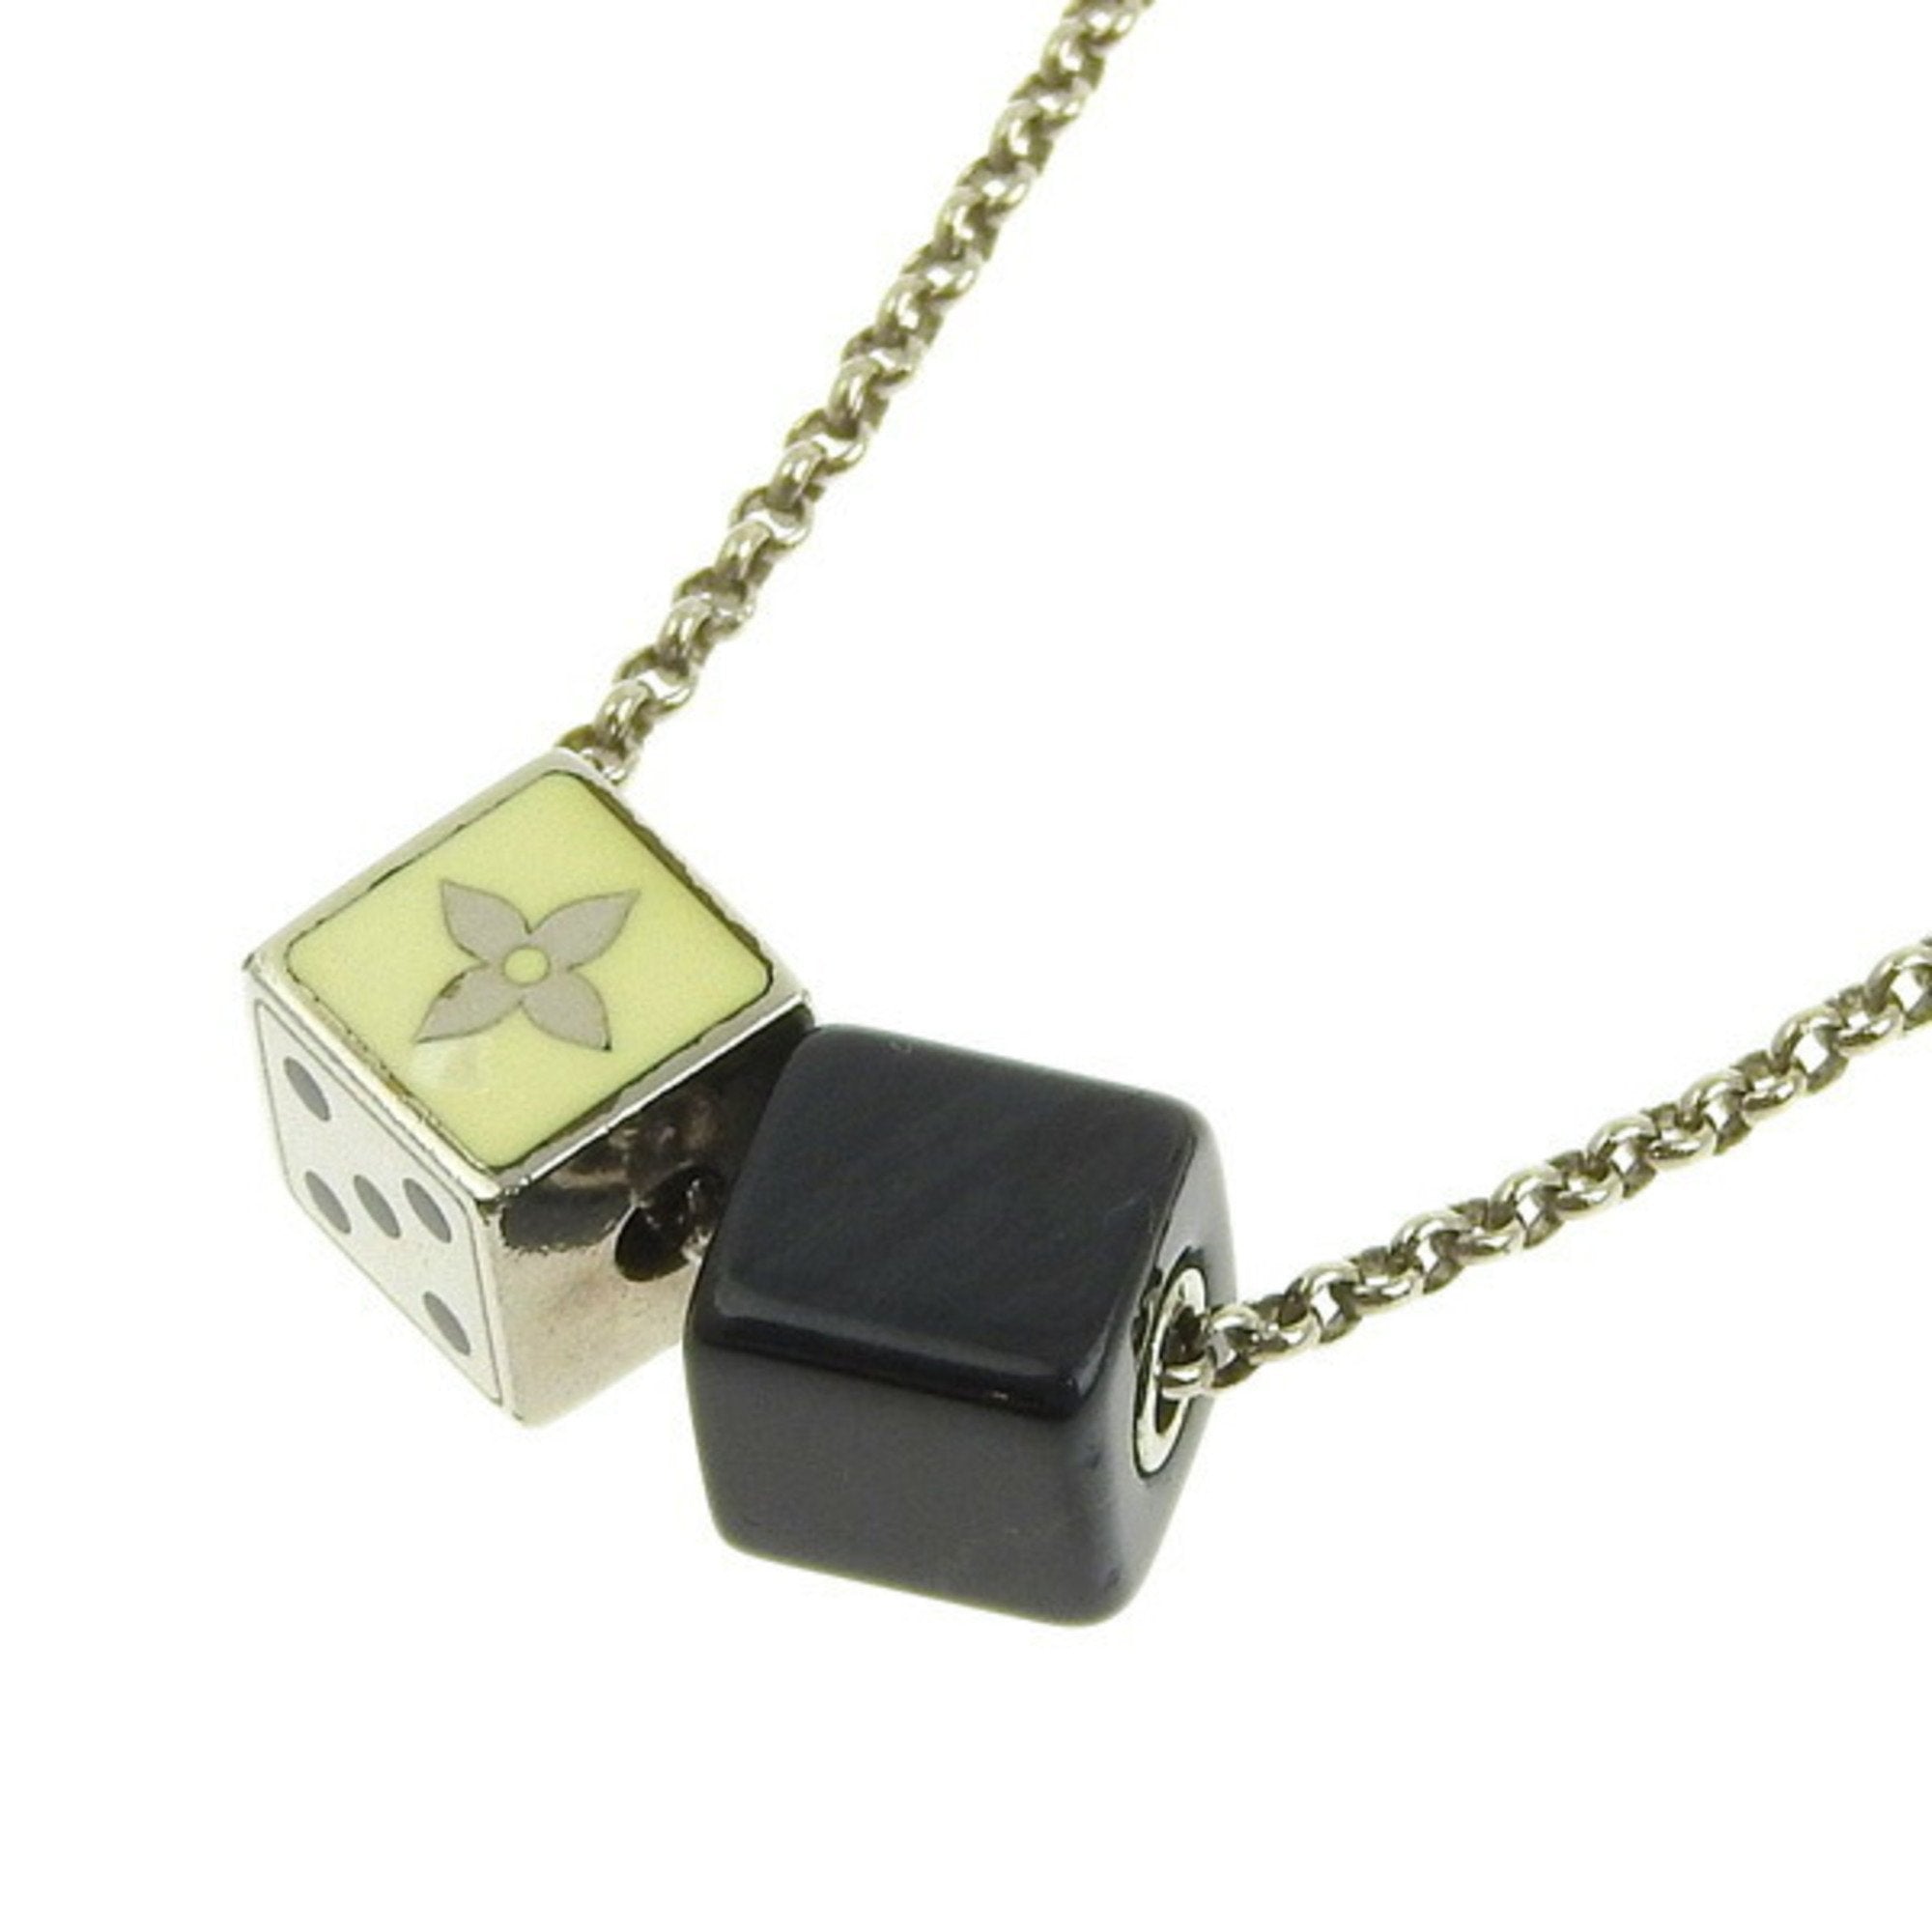 Louis Vuitton, Jewelry, Louis Vuitton Louis Vuitton Collier Dice Gambling  Necklace Silver Metal